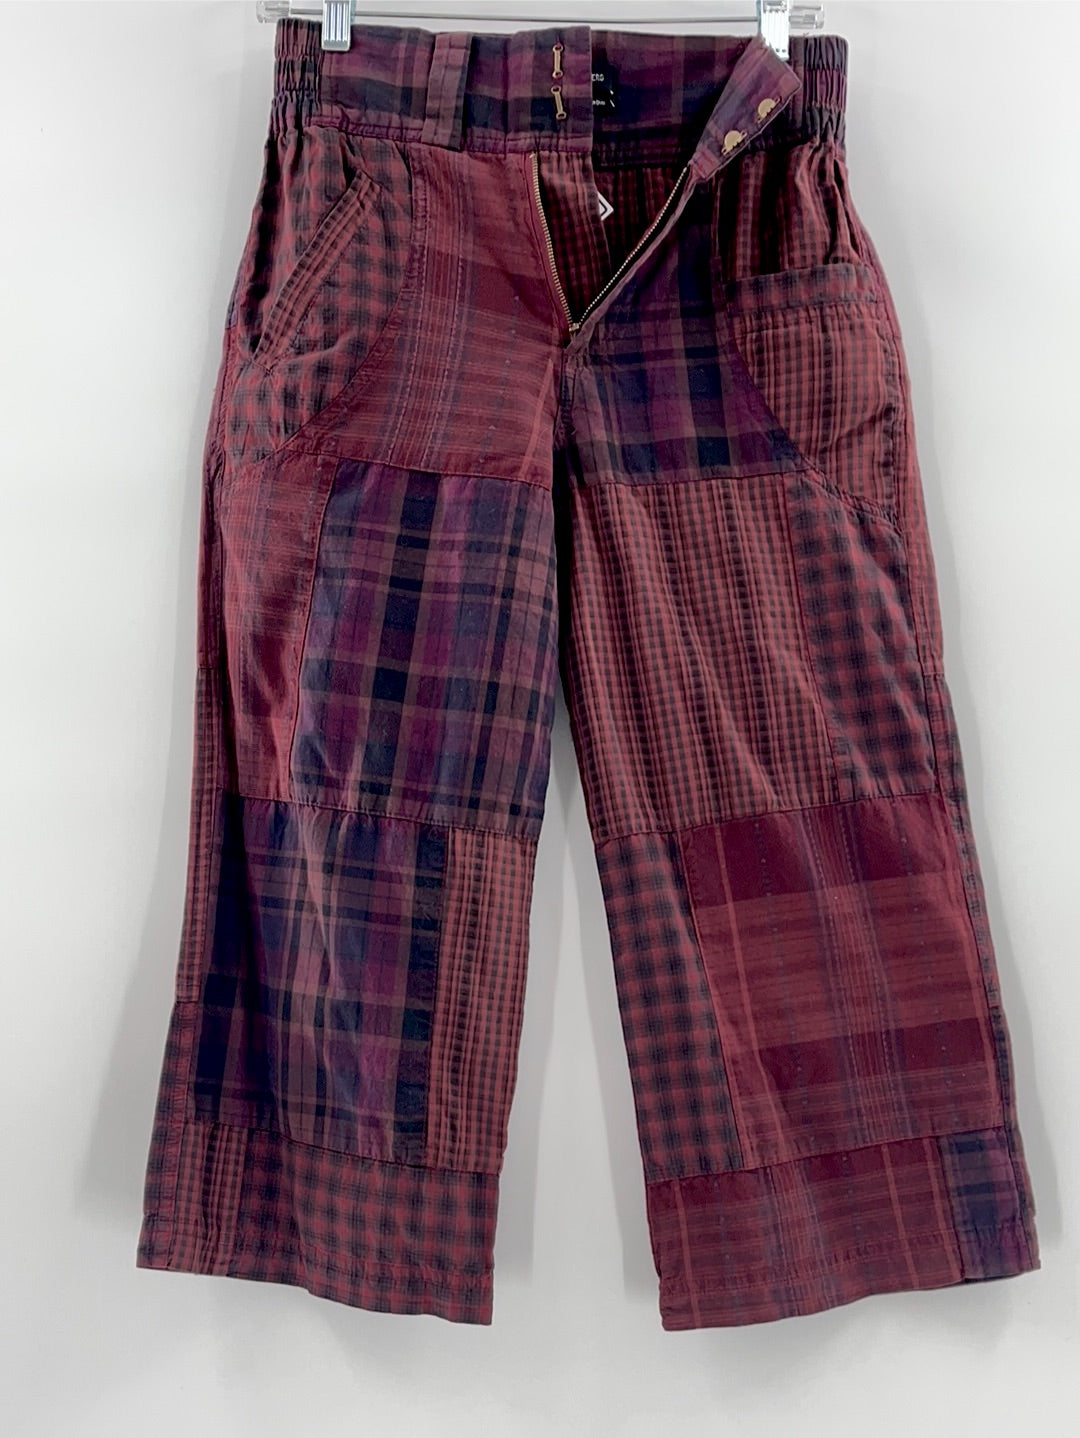 Urban Outfitters Brick Patchwork Pants (Size 0)